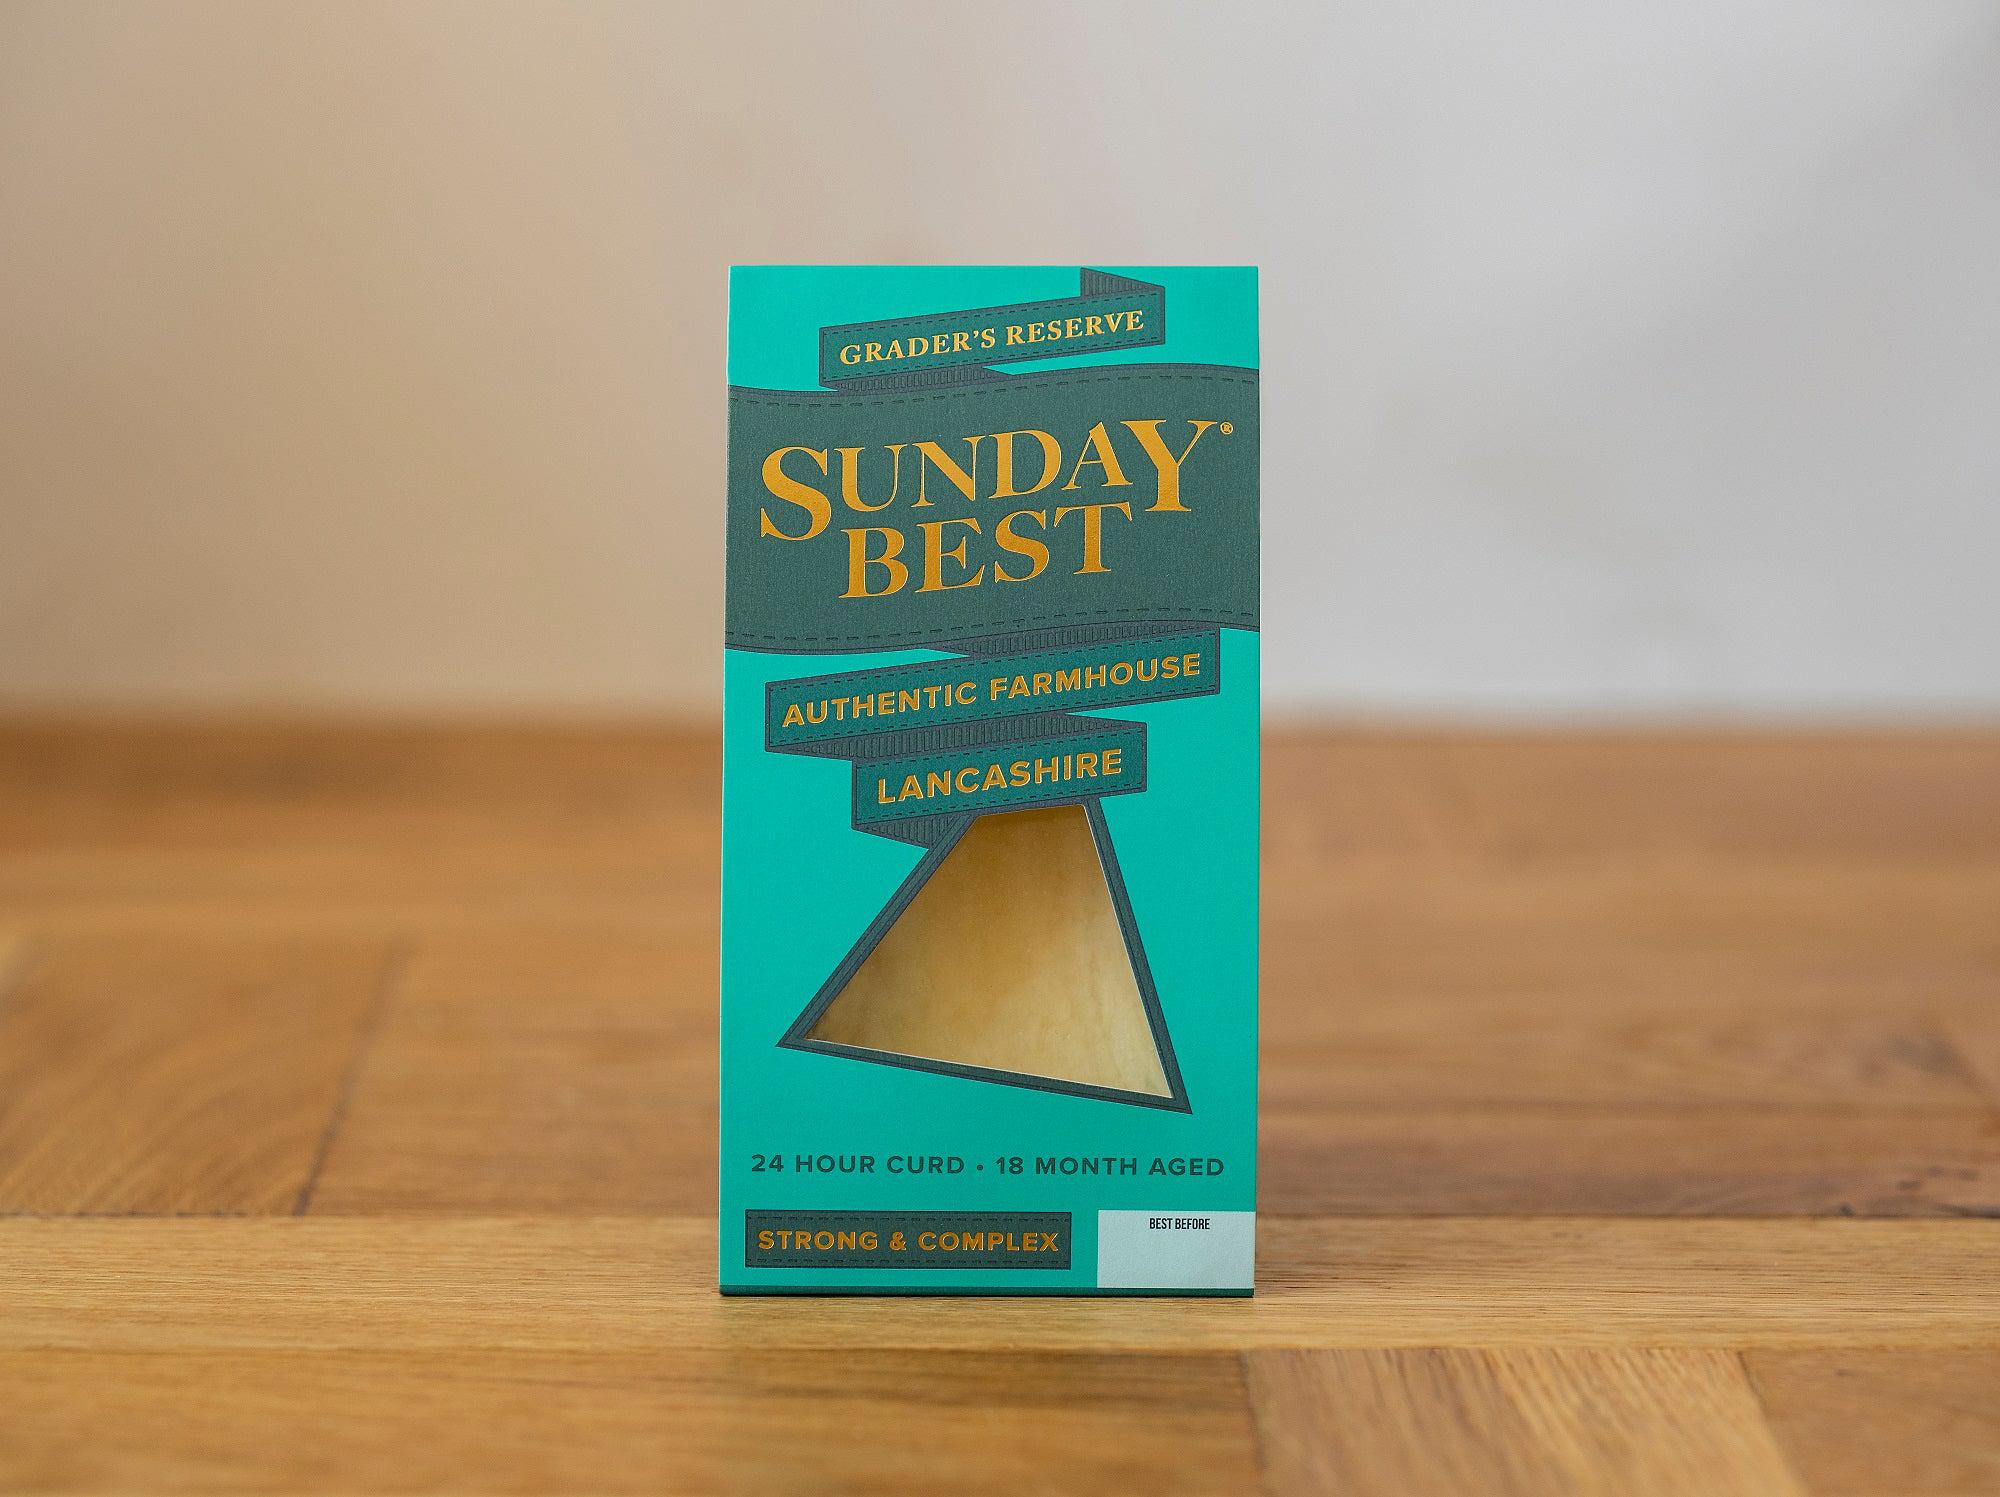 Sunday Best in it's packagin on a wooden surface. Our award-winning British farmhouse cheese.